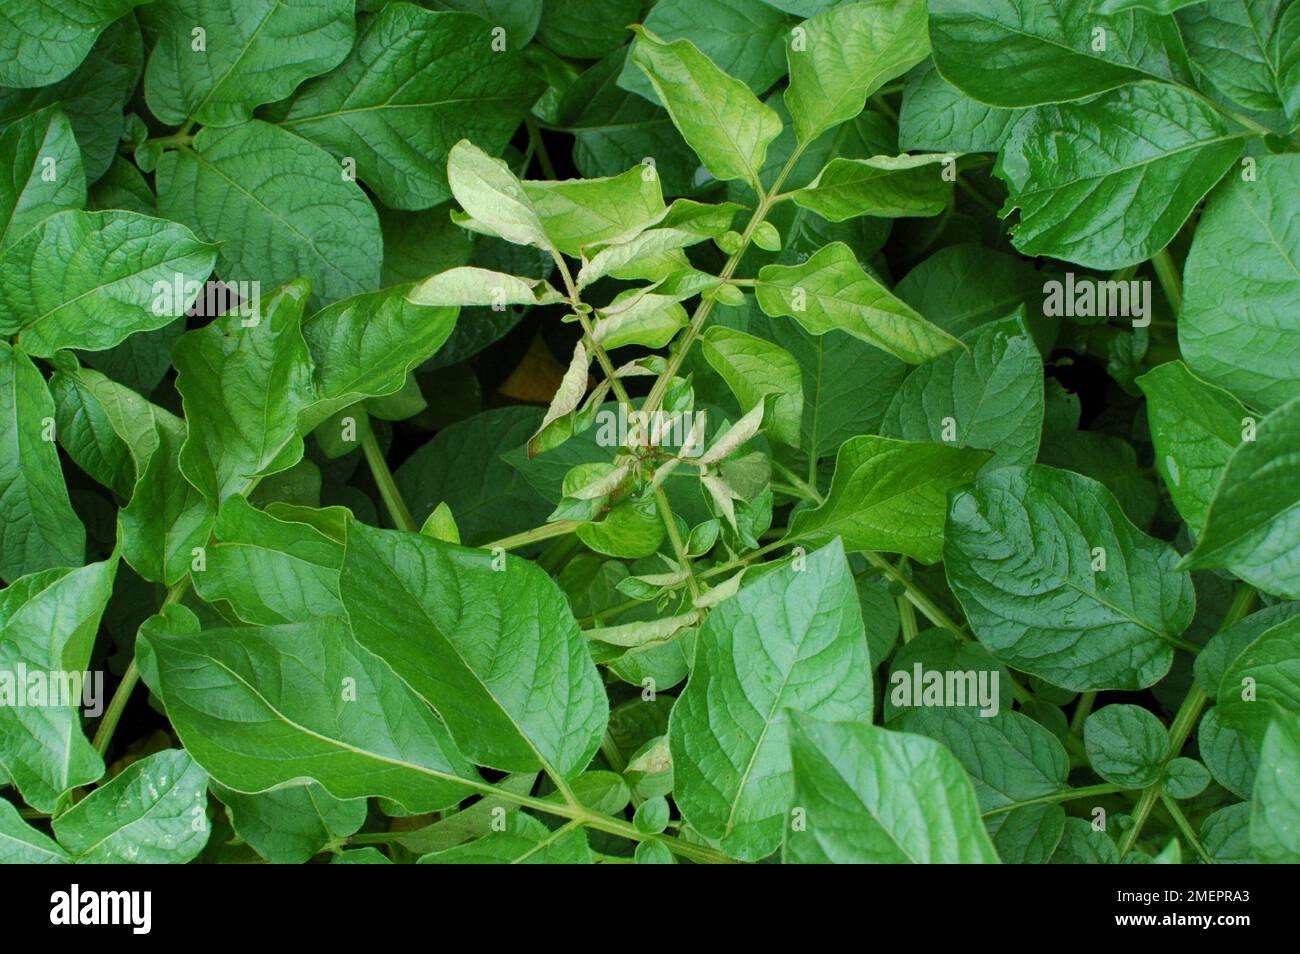 Potato plant infected with potato virus, showing distorted leaf growth Stock Photo